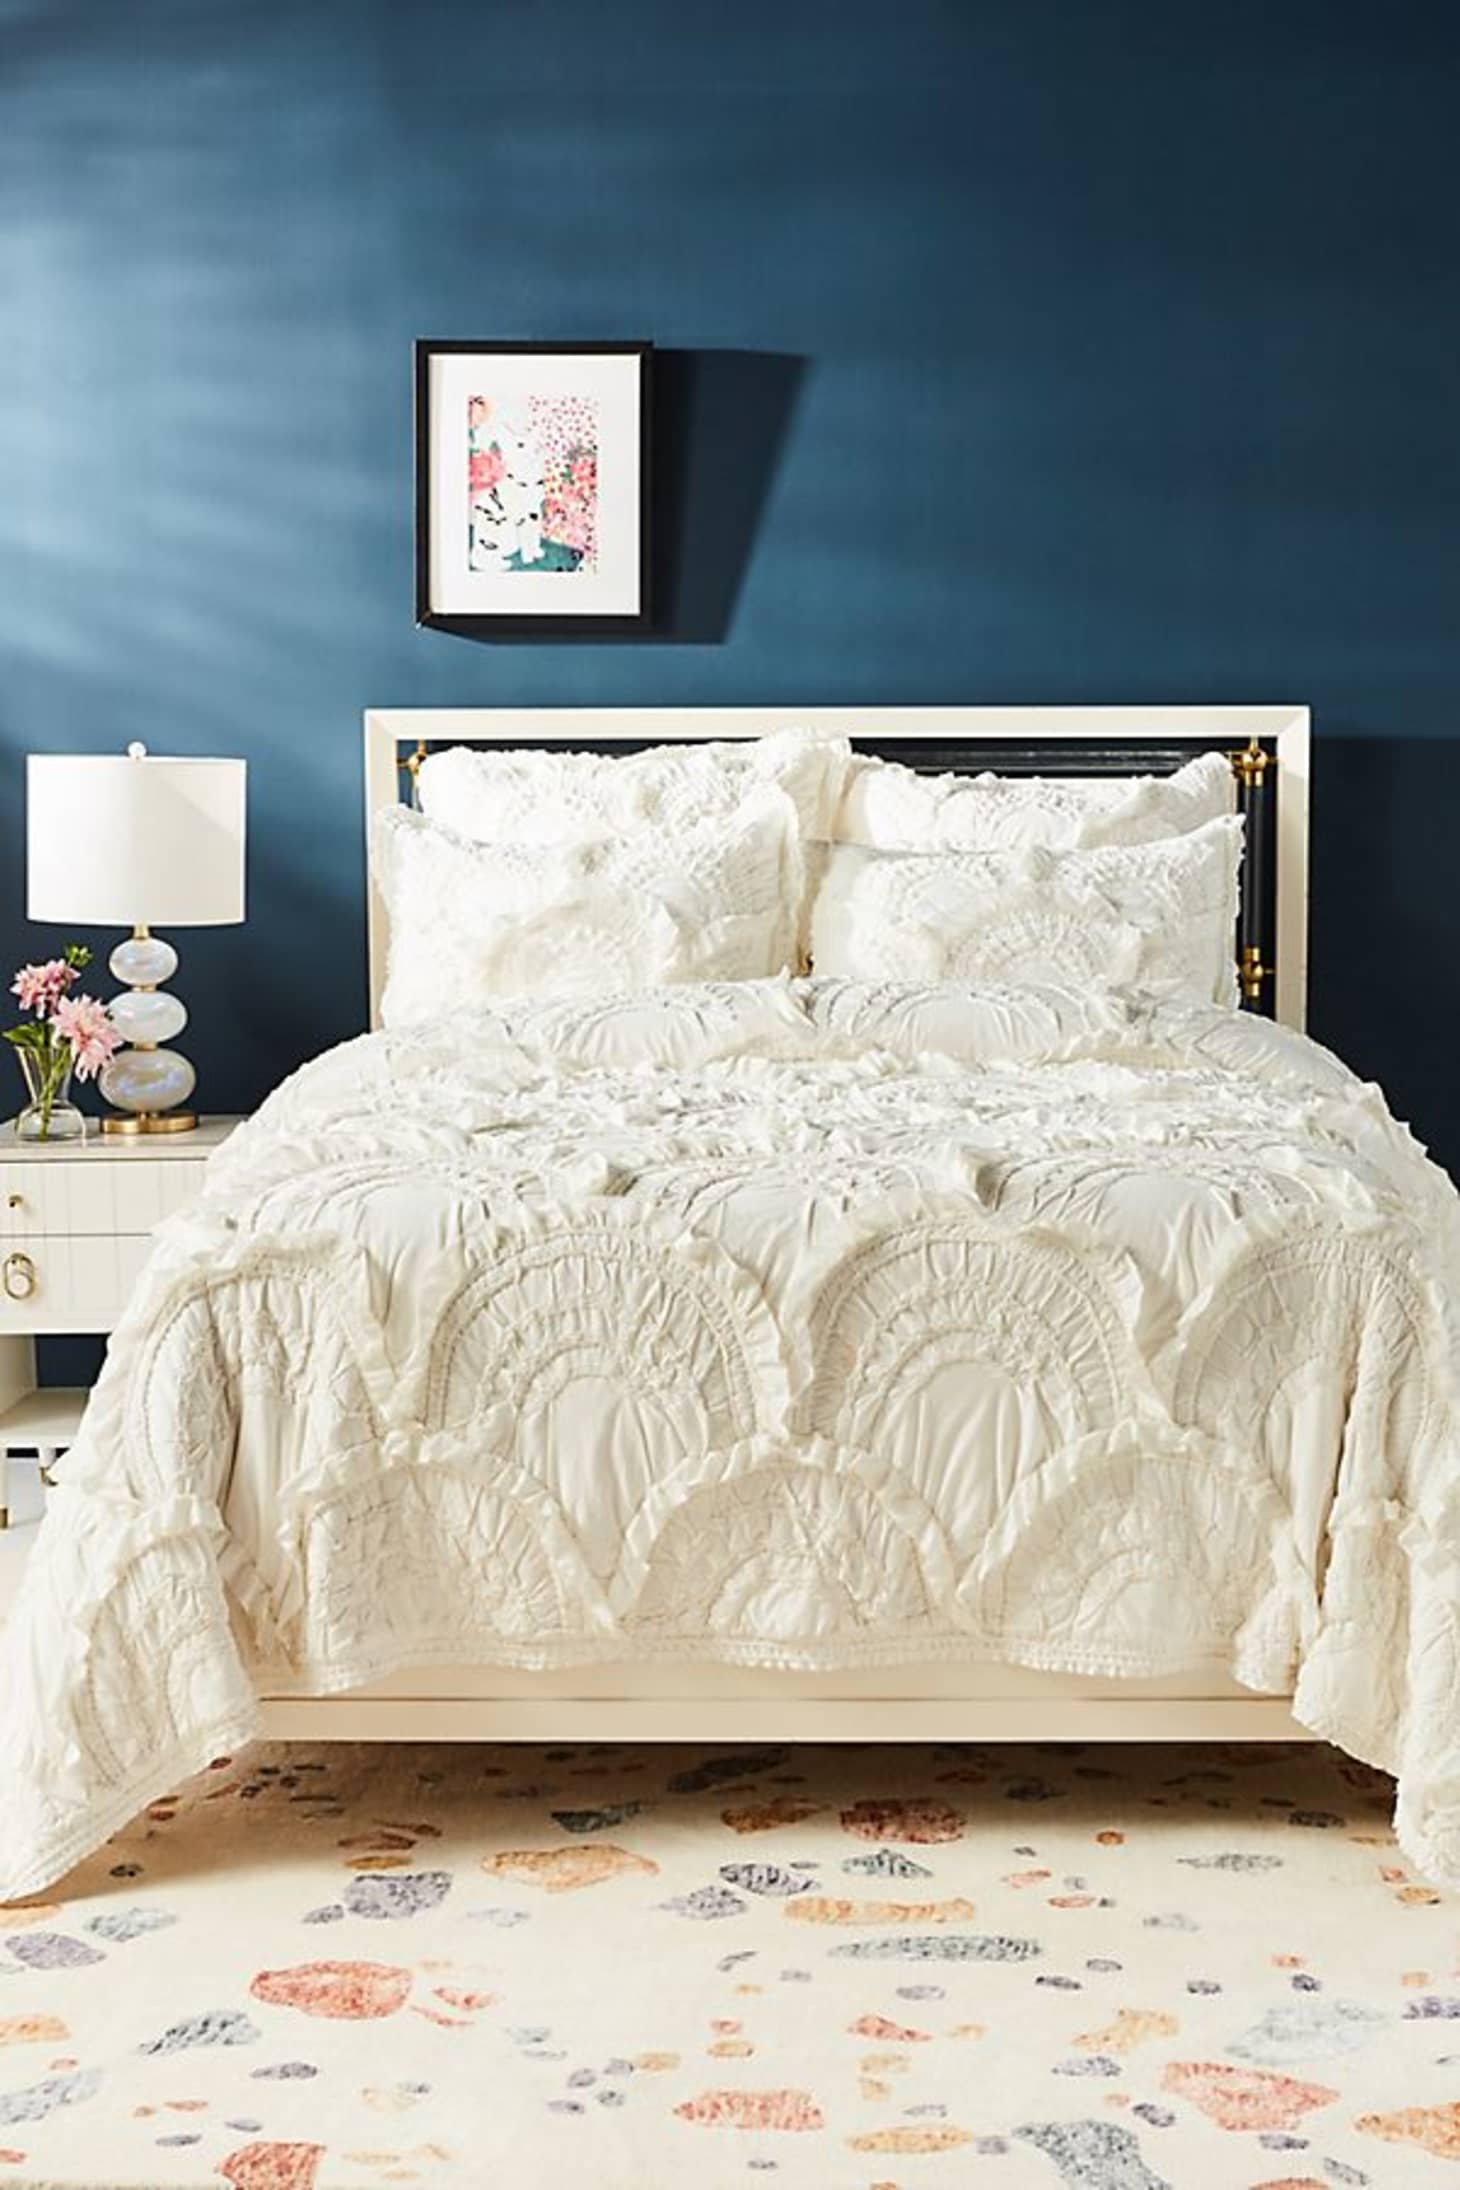 Anthropologie Bedding Sale February 2020 Apartment Therapy